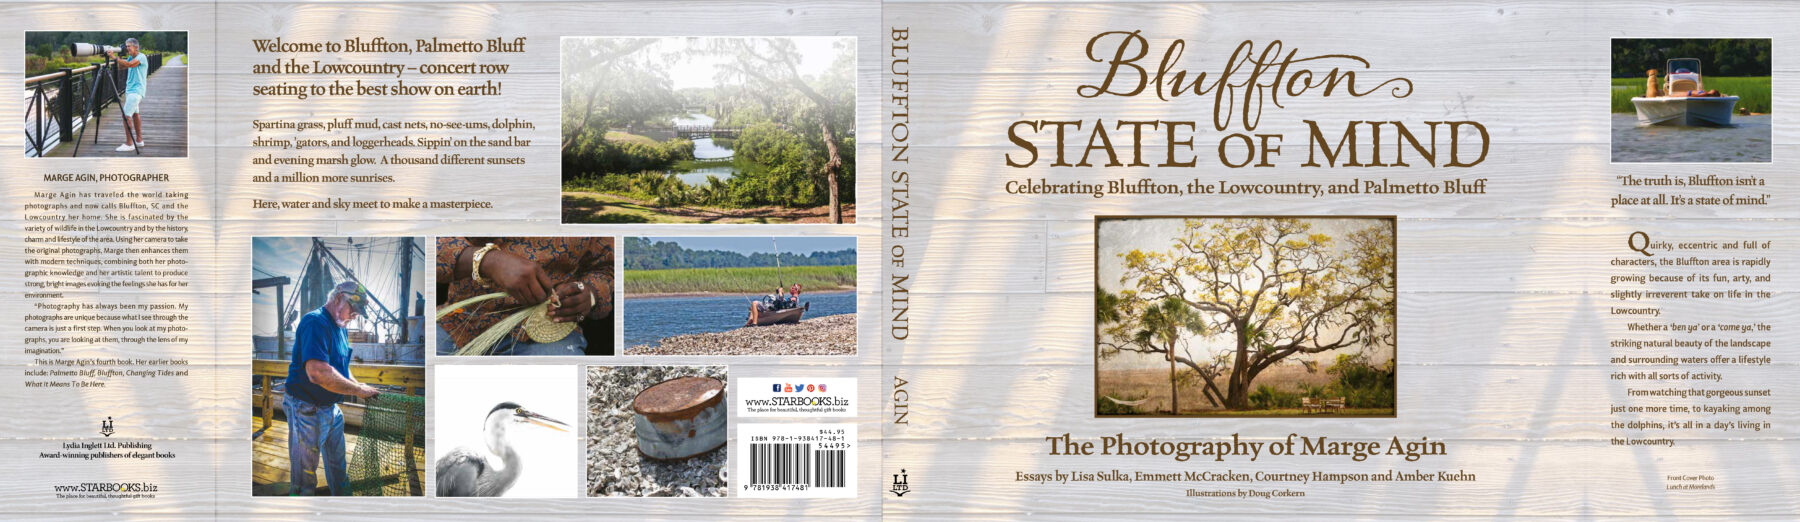 Marge Agin, Lowcountry Fine Art Photography Book Bluffton State of Mind